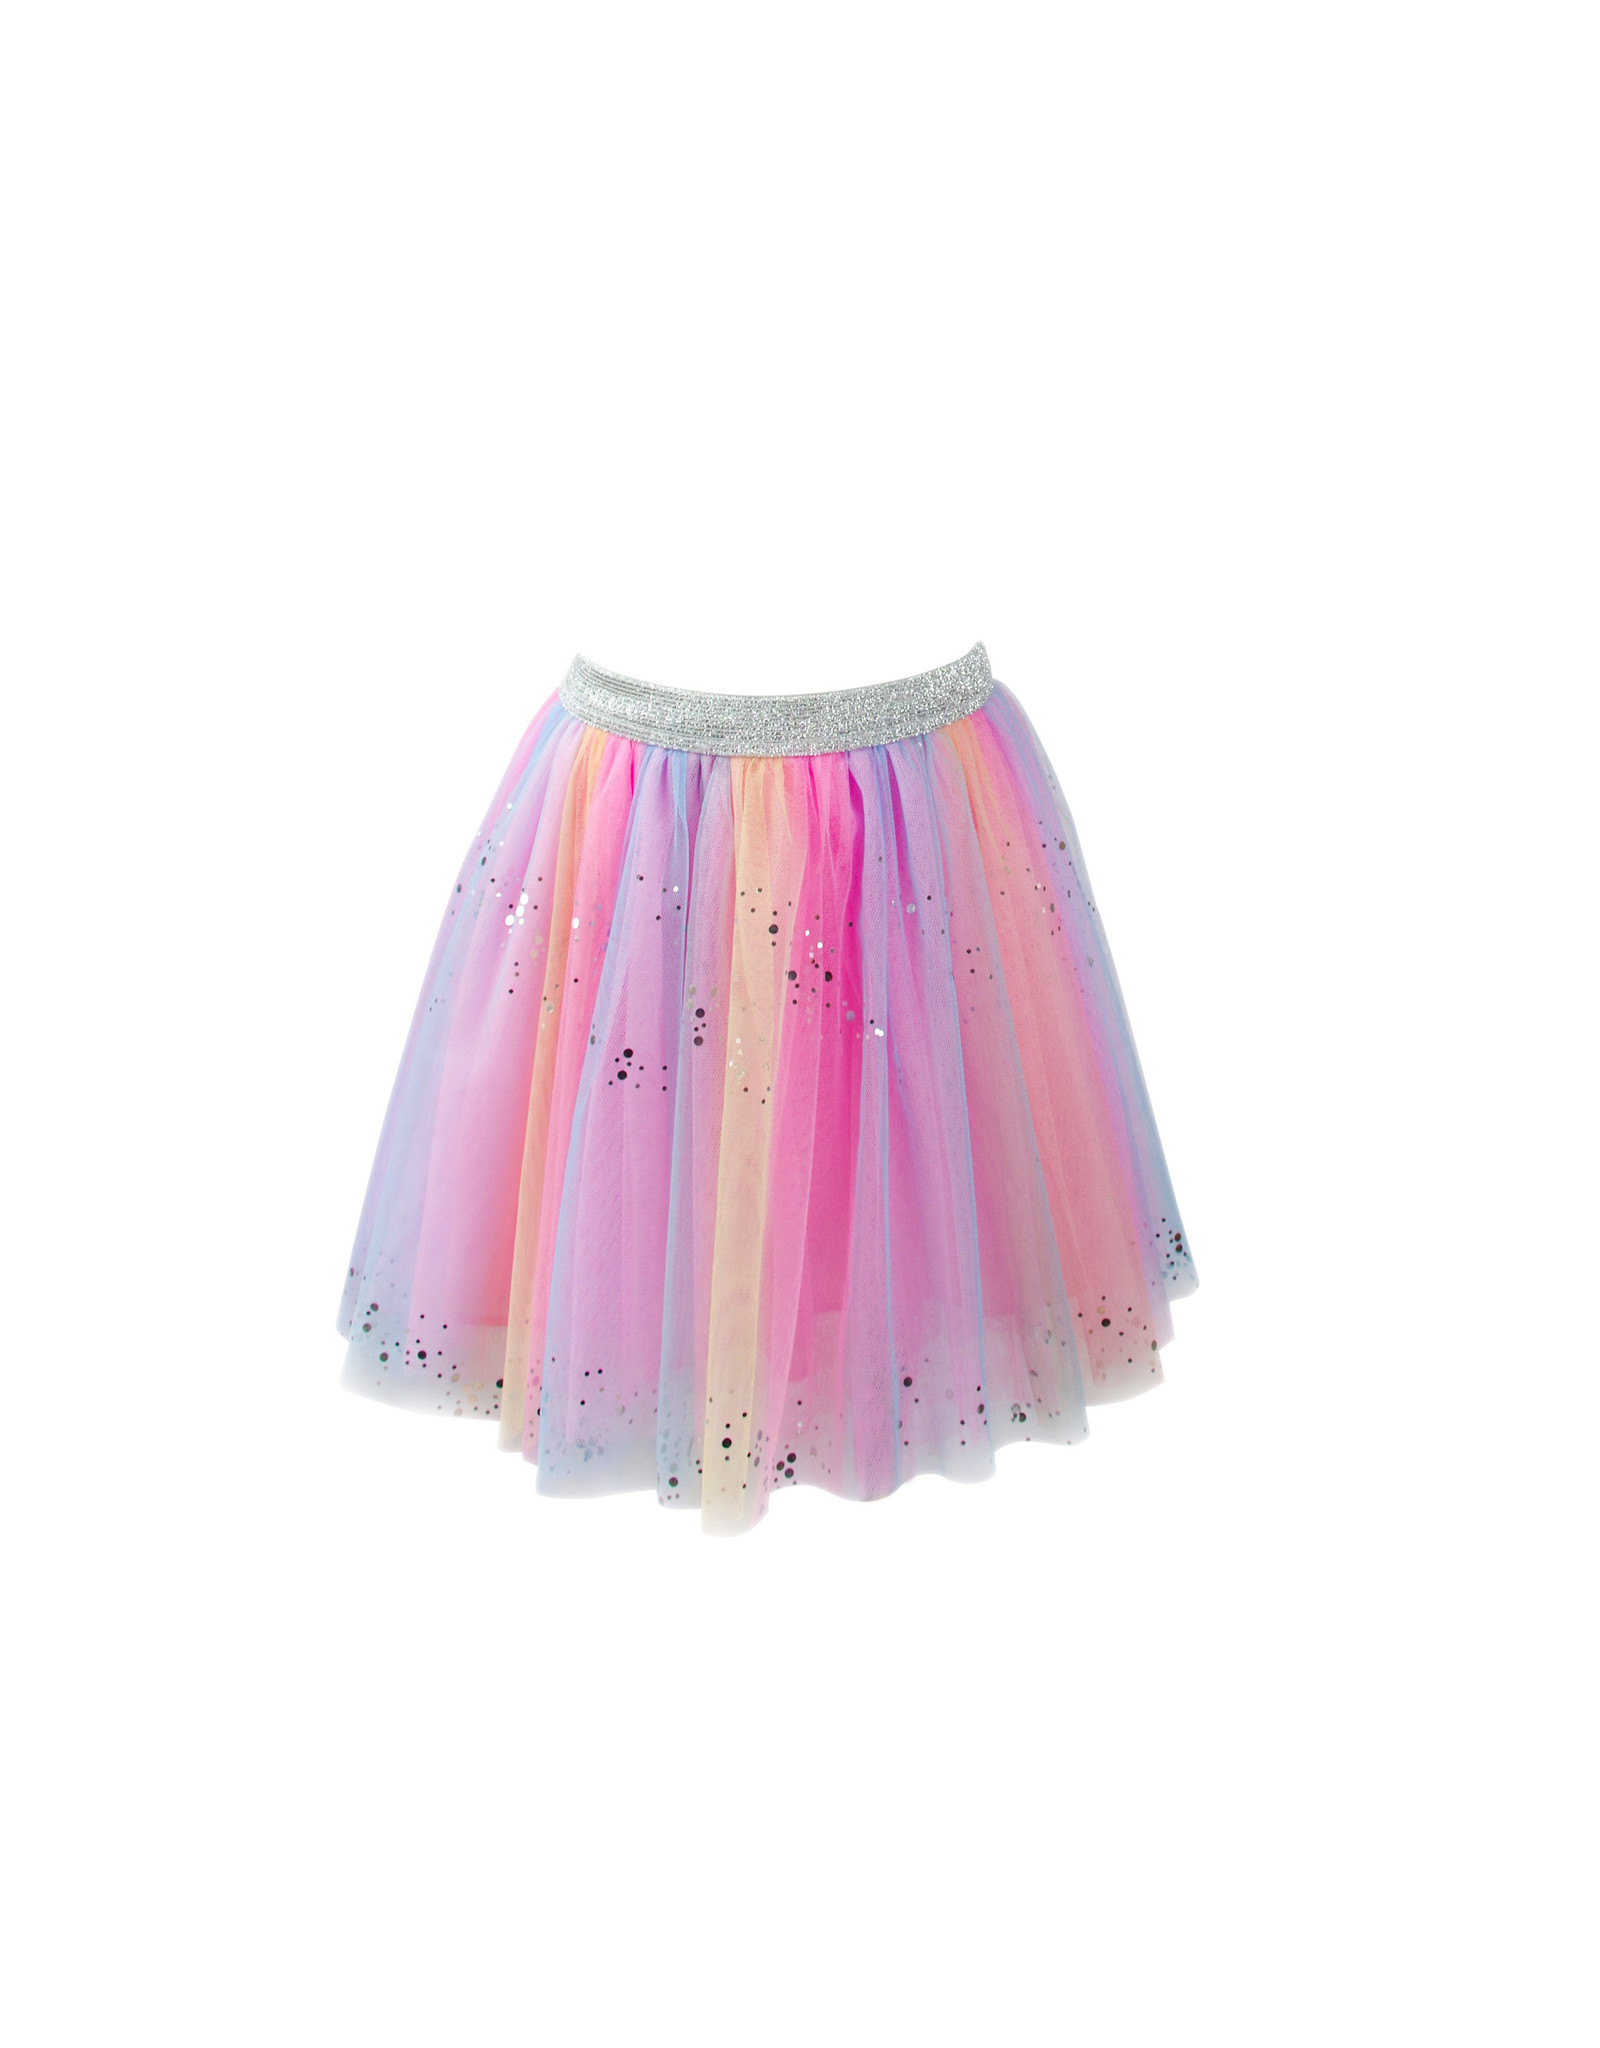 Great Pretenders Rainbow Sequins Skirt with Wings & Wand Size 4-6